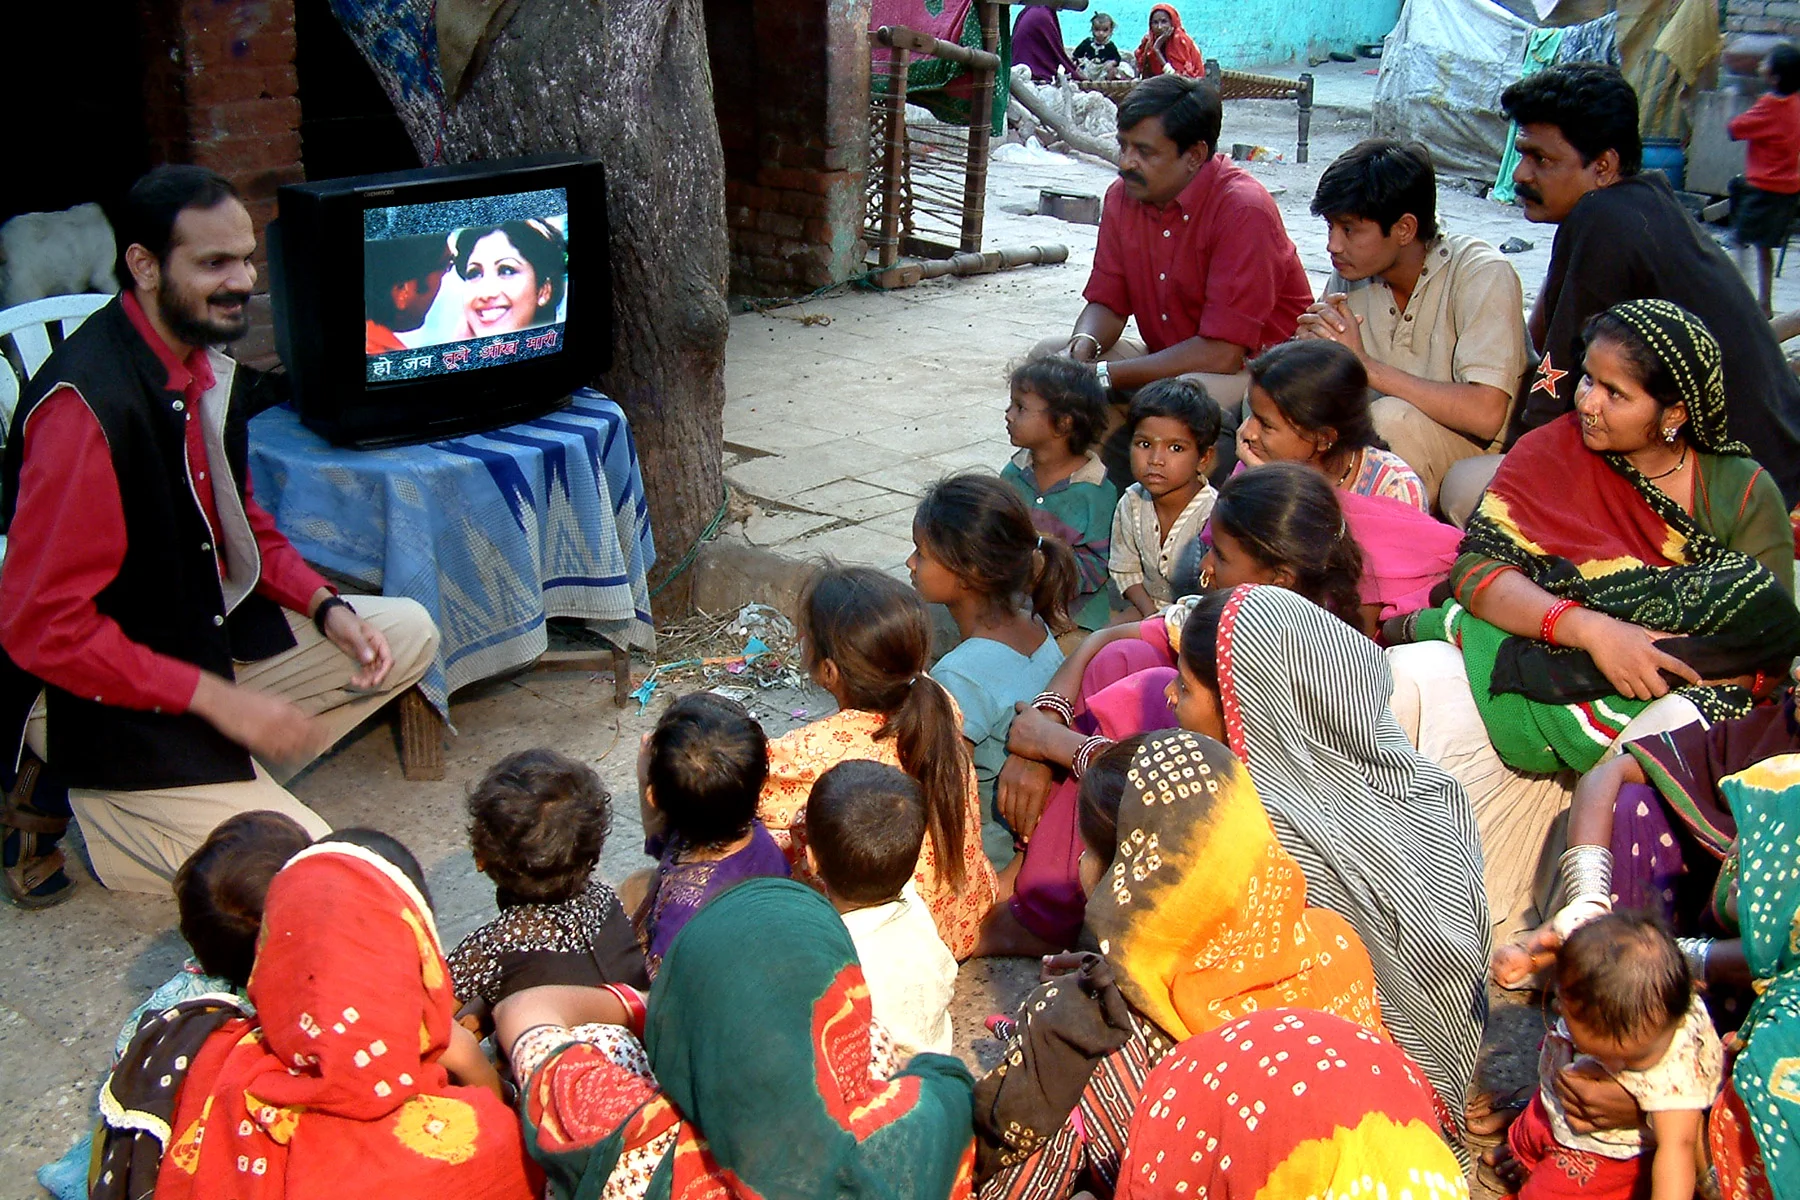 Seven ways to create entertainment with impact | India Development Review